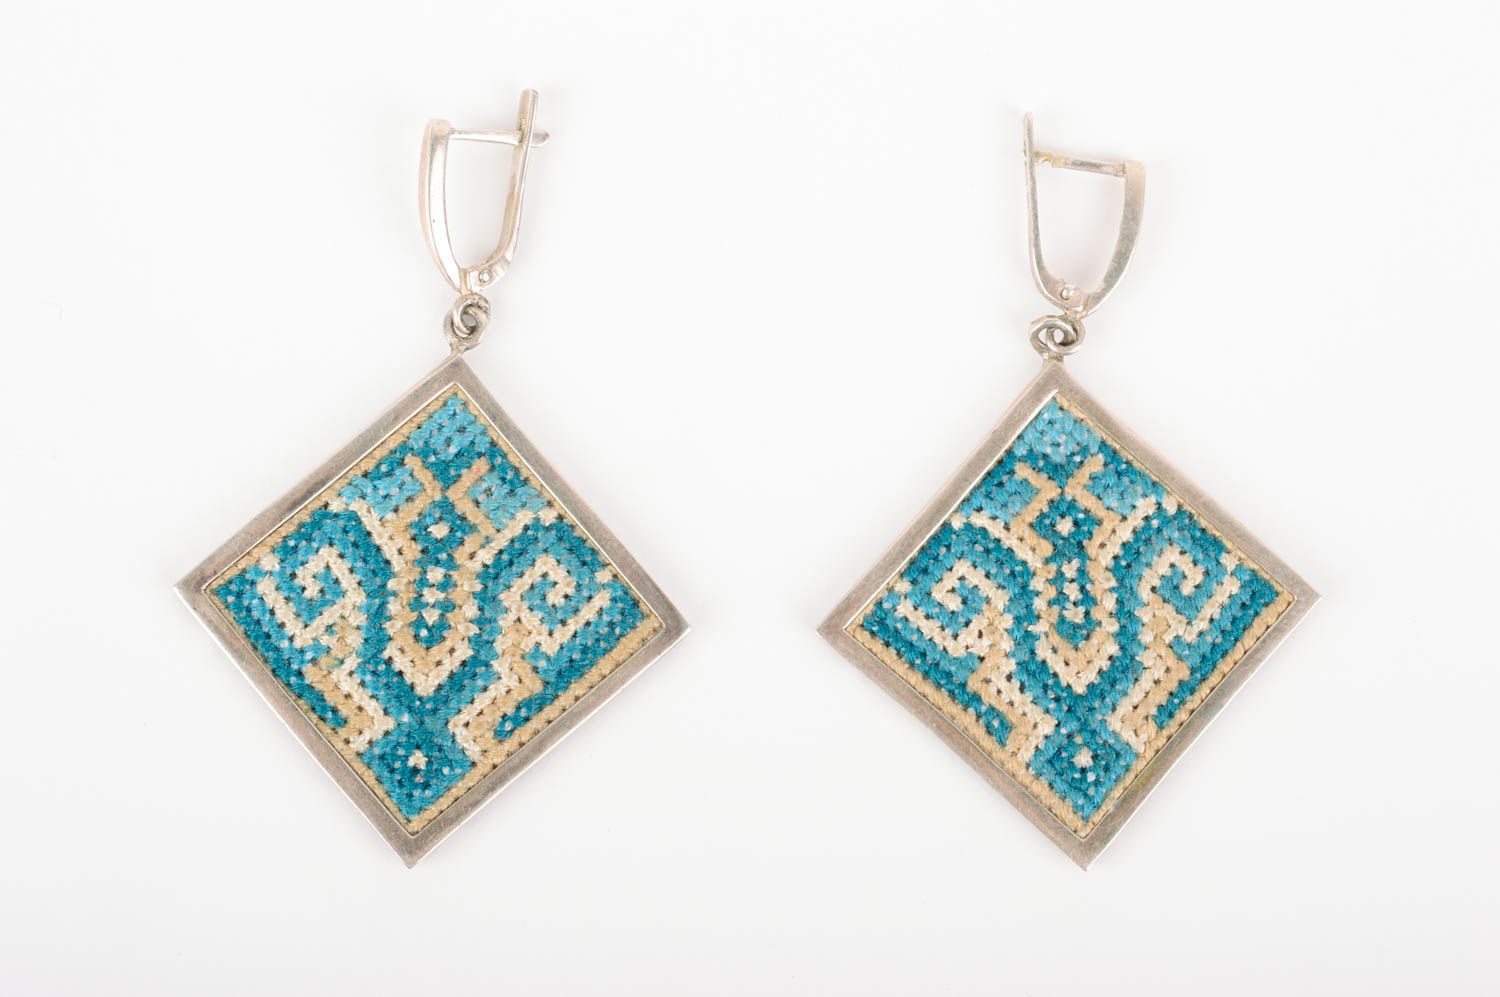 Handmade embroidered earrings designer fabric accessories with embroidery photo 1